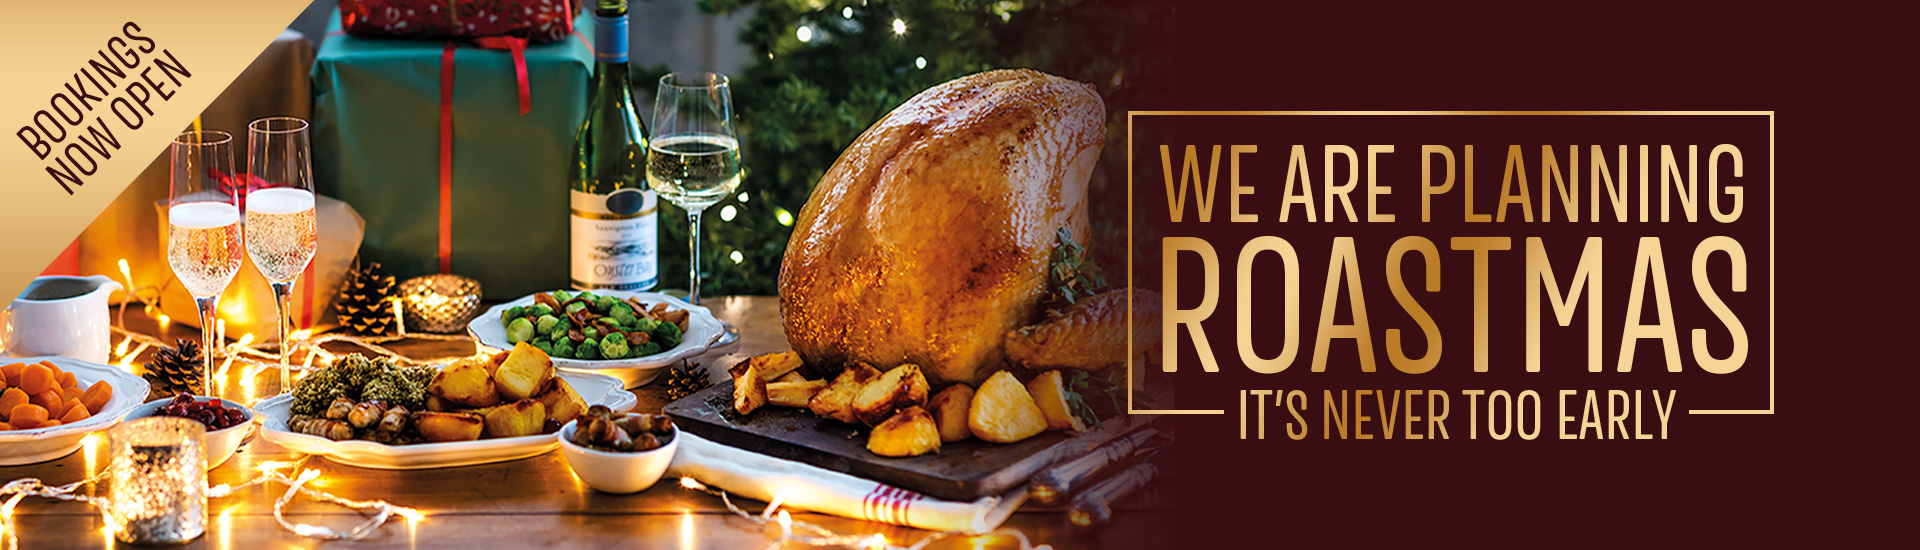 Christmas 2022 at your local Toby Carvery Knowle | Home of the Roast